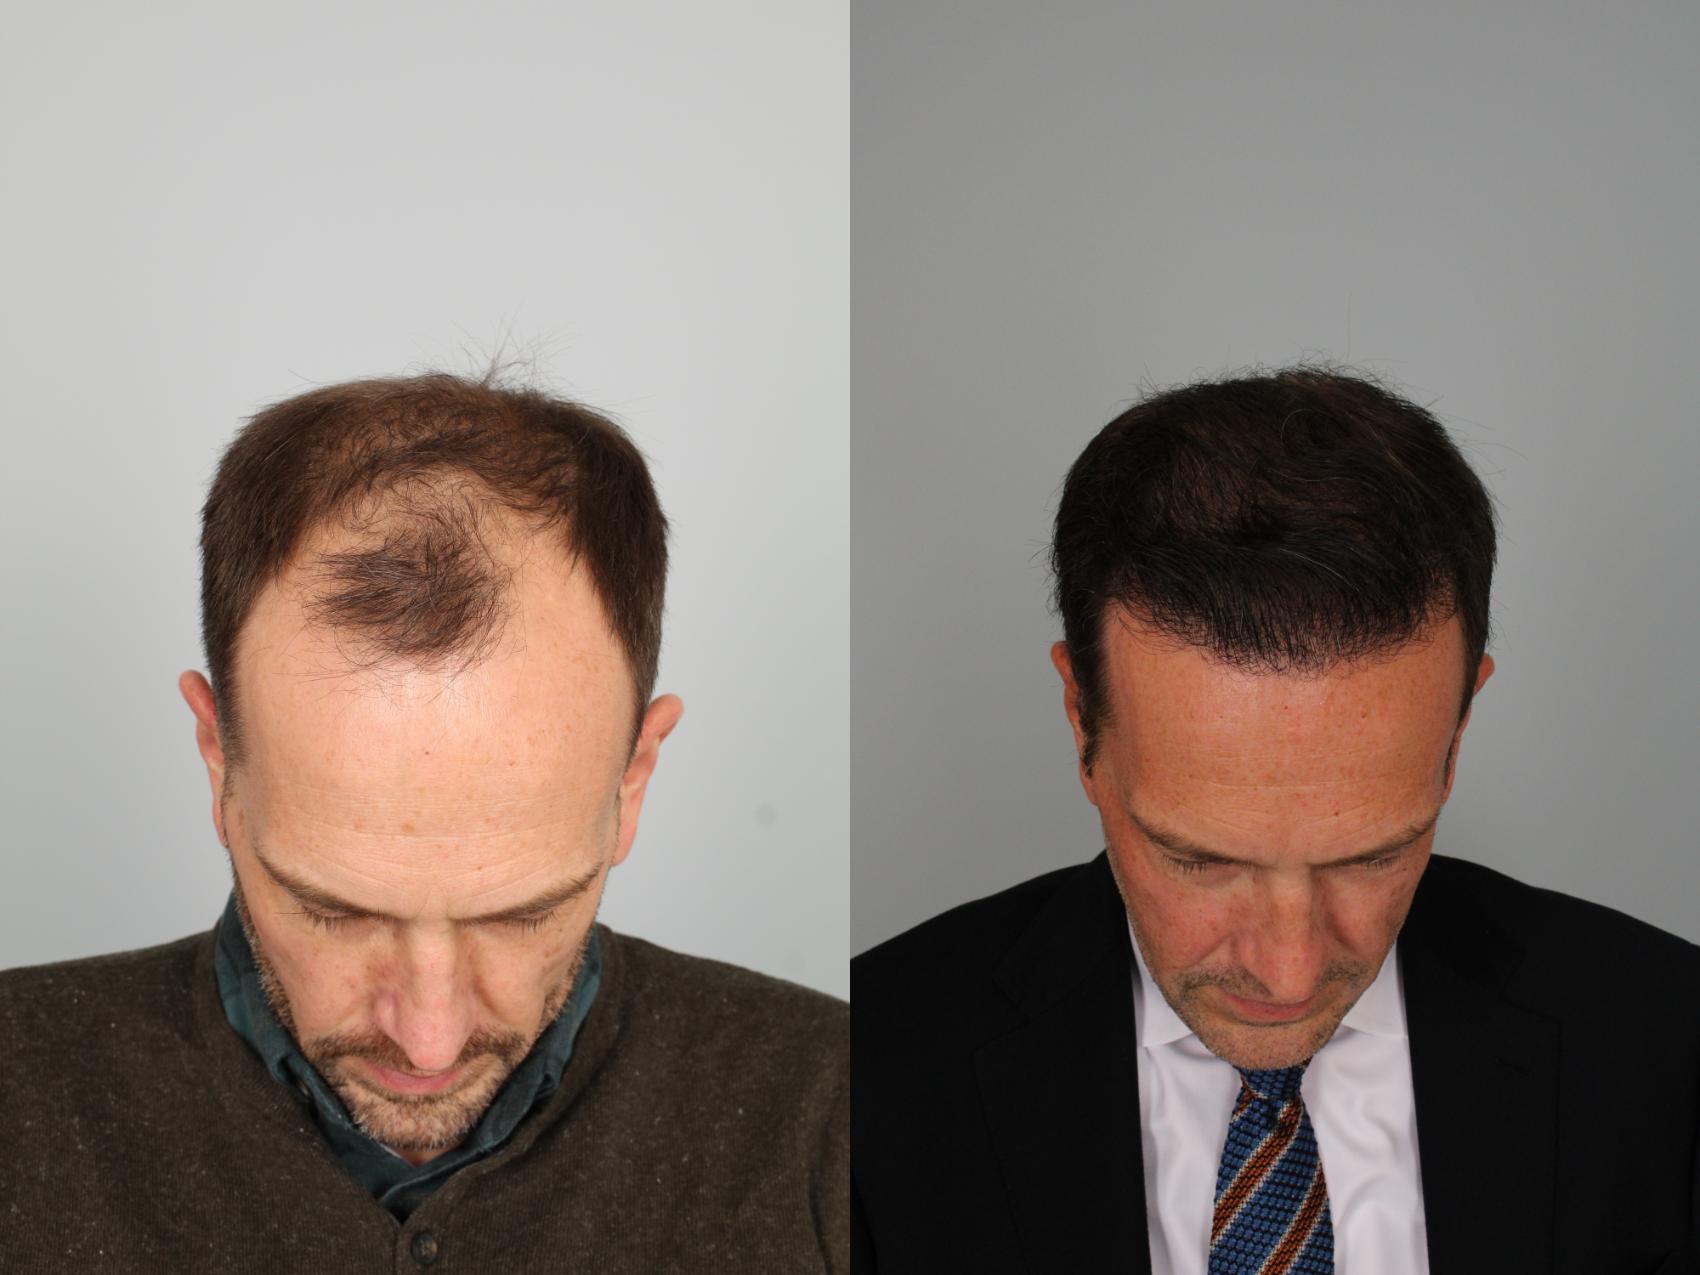 NeoGraft hair restoration treatments at CaloSpa offer a minimally invasive hair loss solution for men and women with natural-looking results and fast recovery.